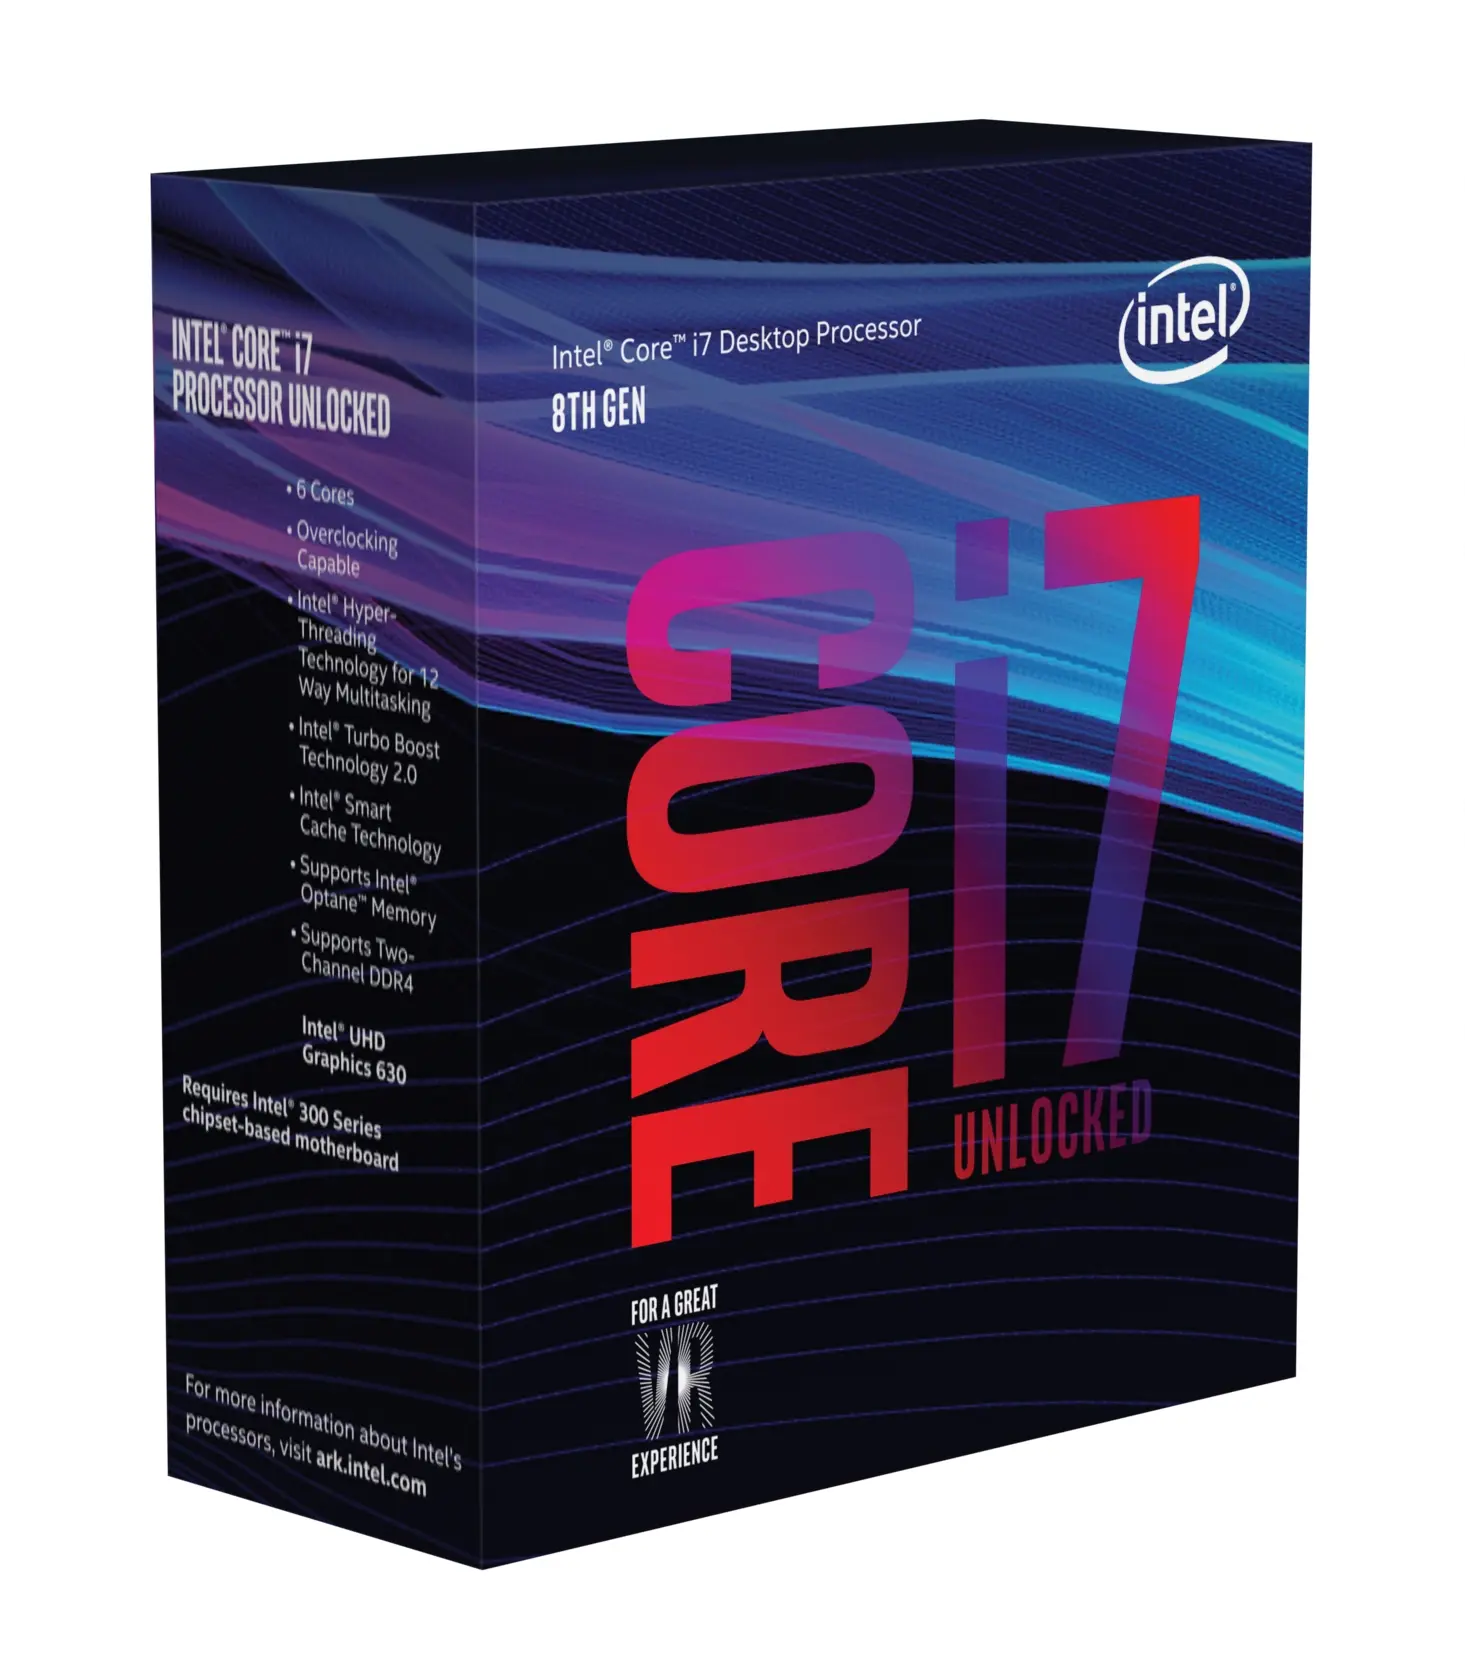 Intel announces the desktop processors of the 8th Gen Intel Core processor family. Availiable for purchase on Oct. 5, 2017, they include Intel’s best desktop gaming processor ever. (Credit: Intel Corporation)